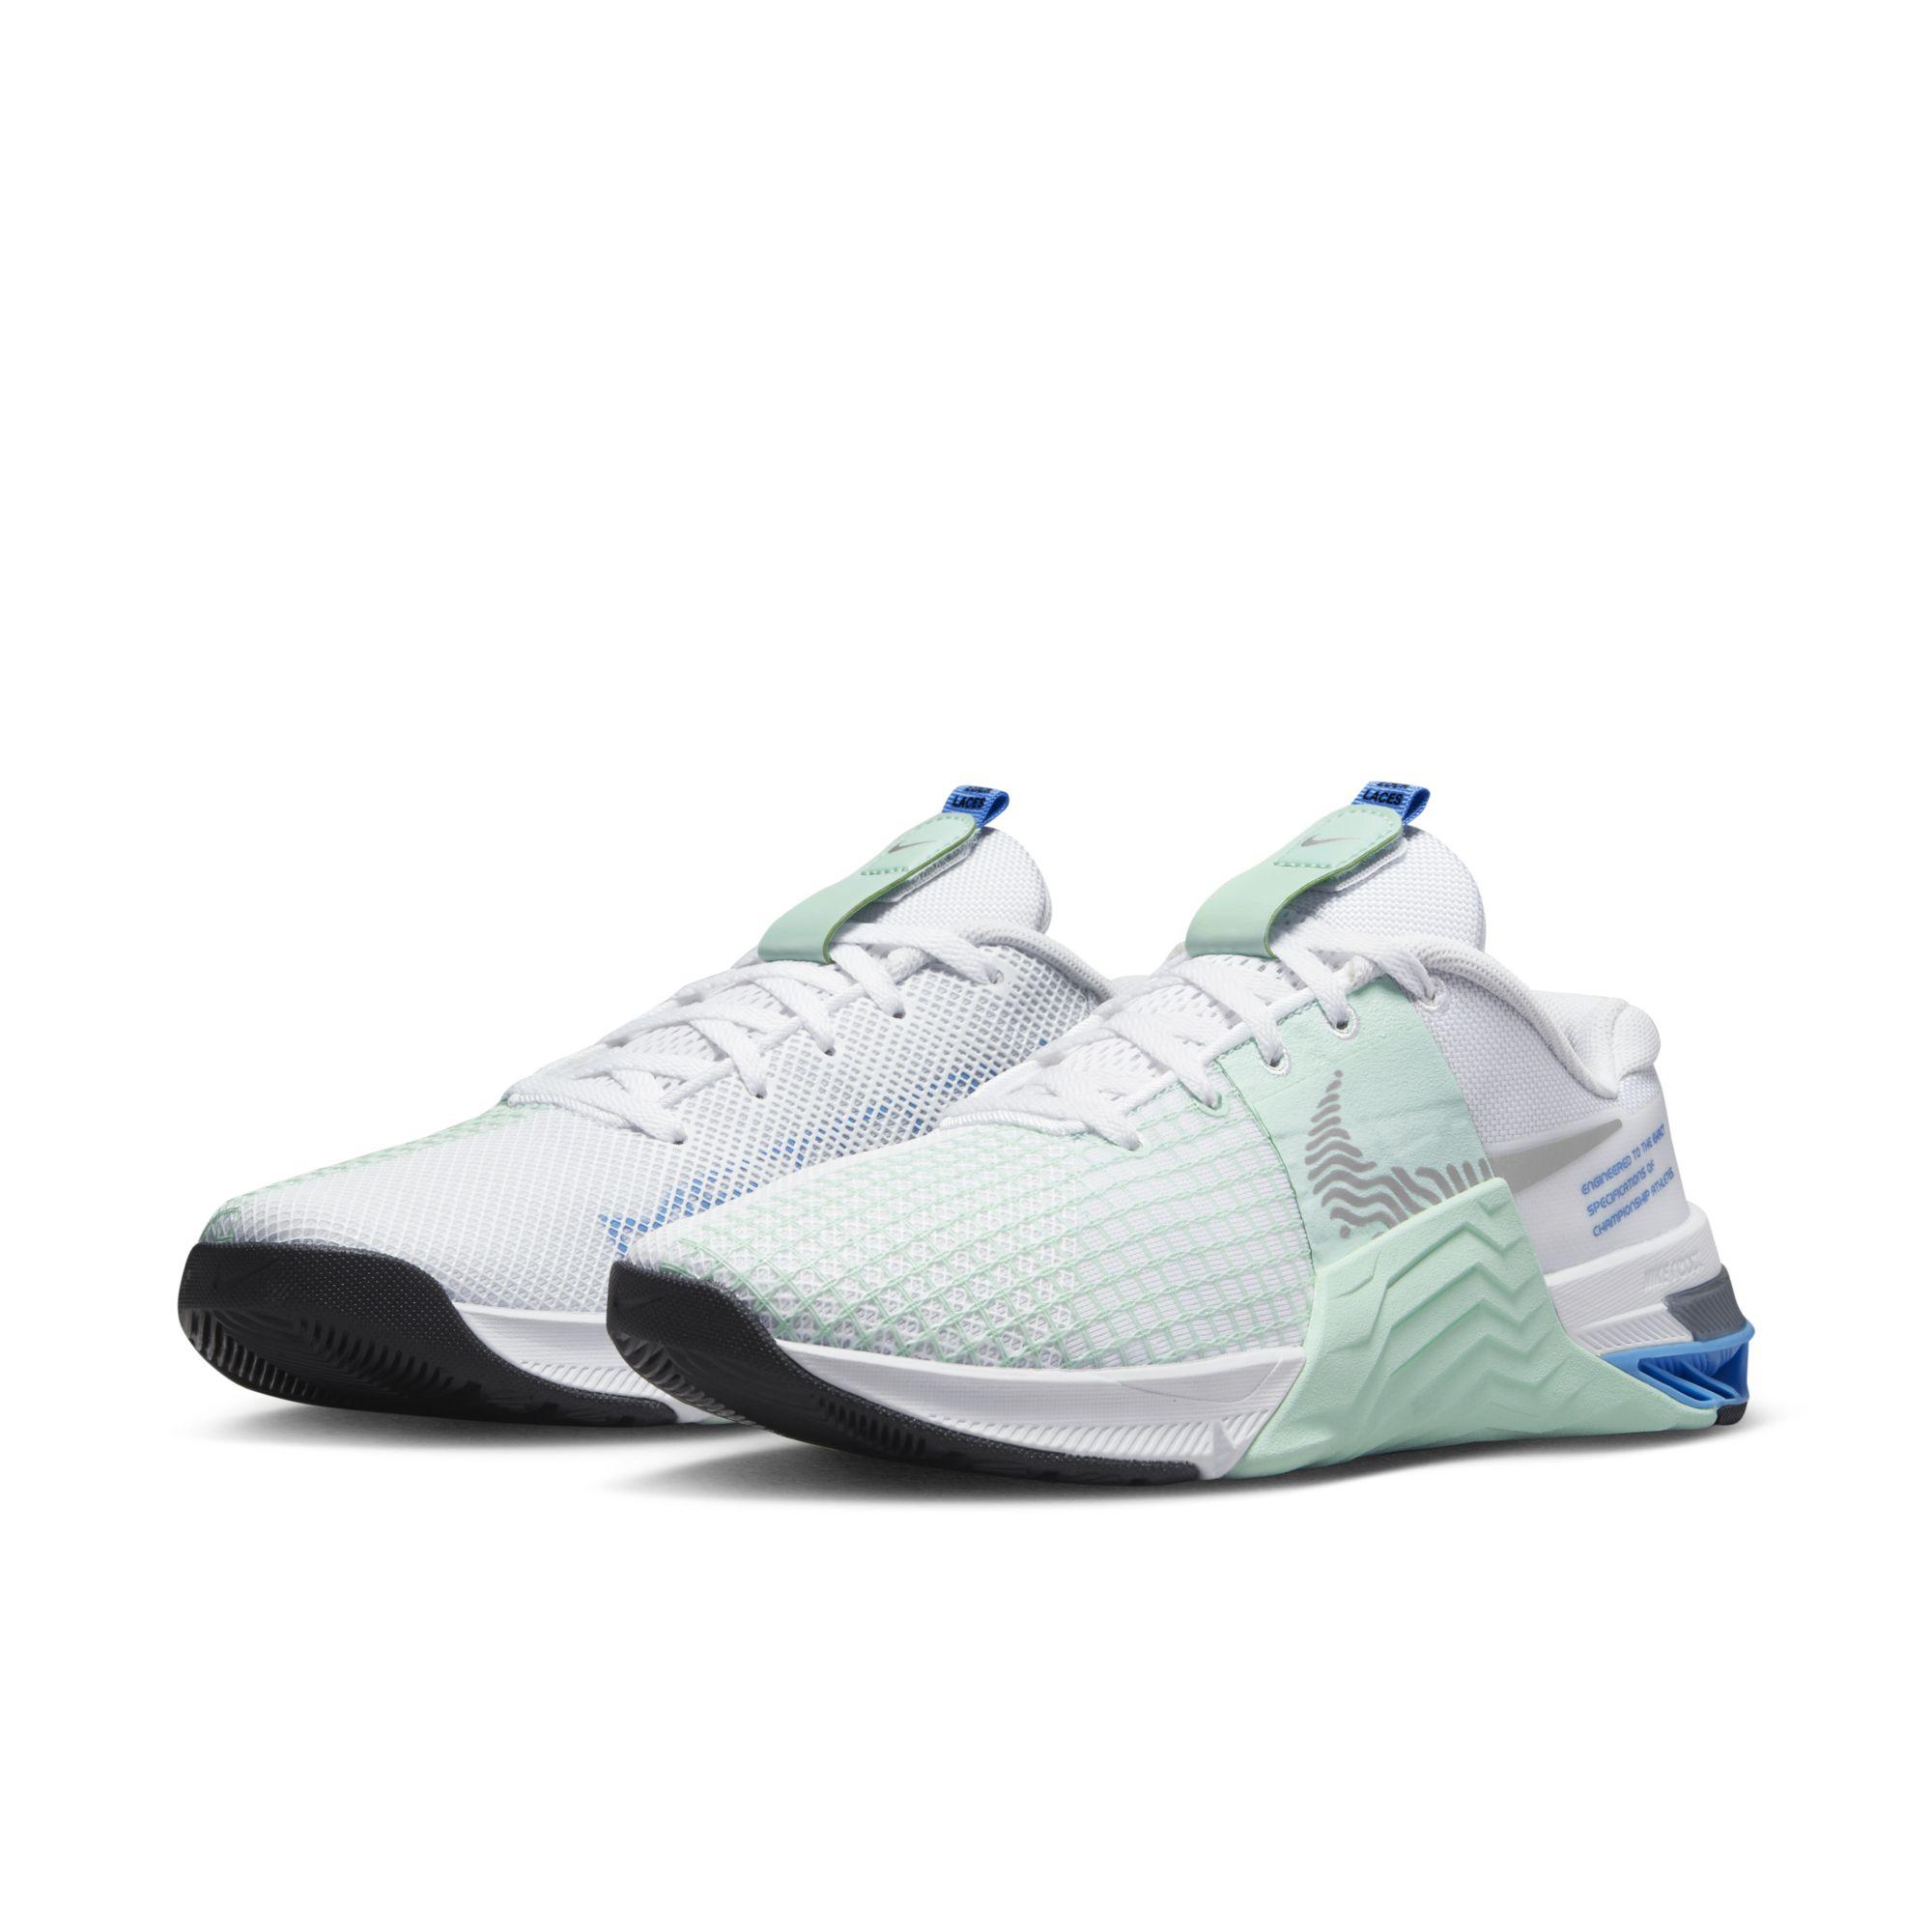 Nike Metcon 8 Training Shoes in Blue | Lyst